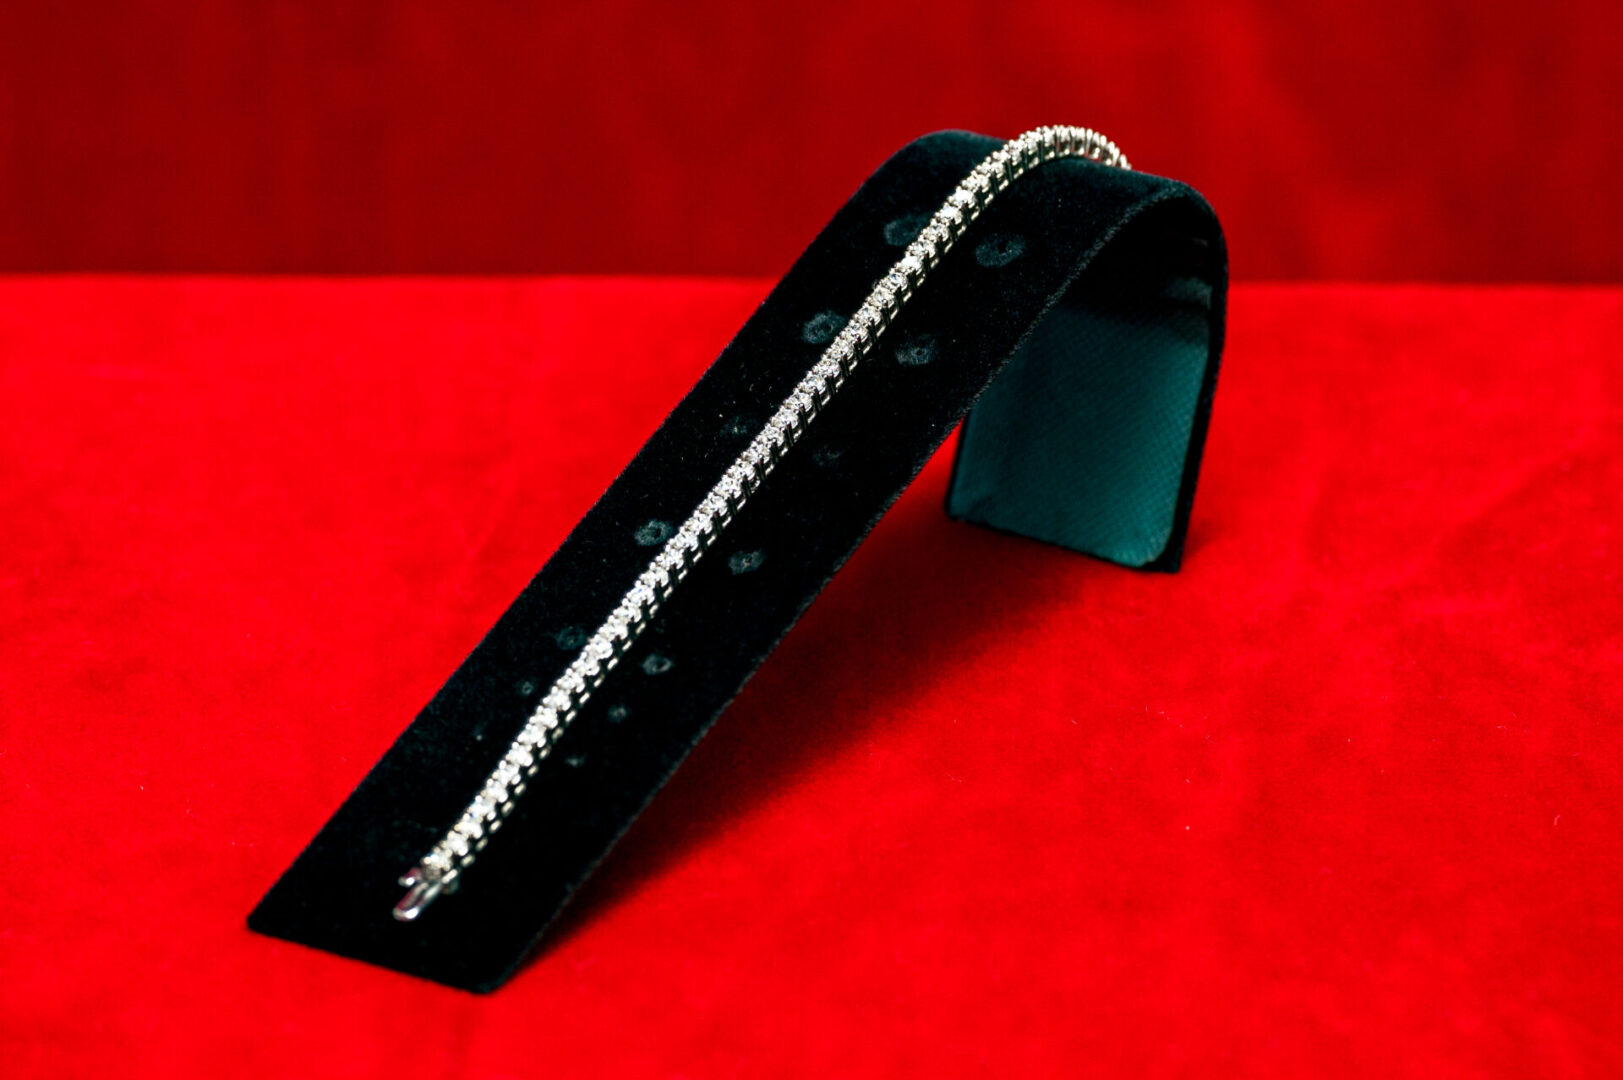 A black metal object with a long chain on it.